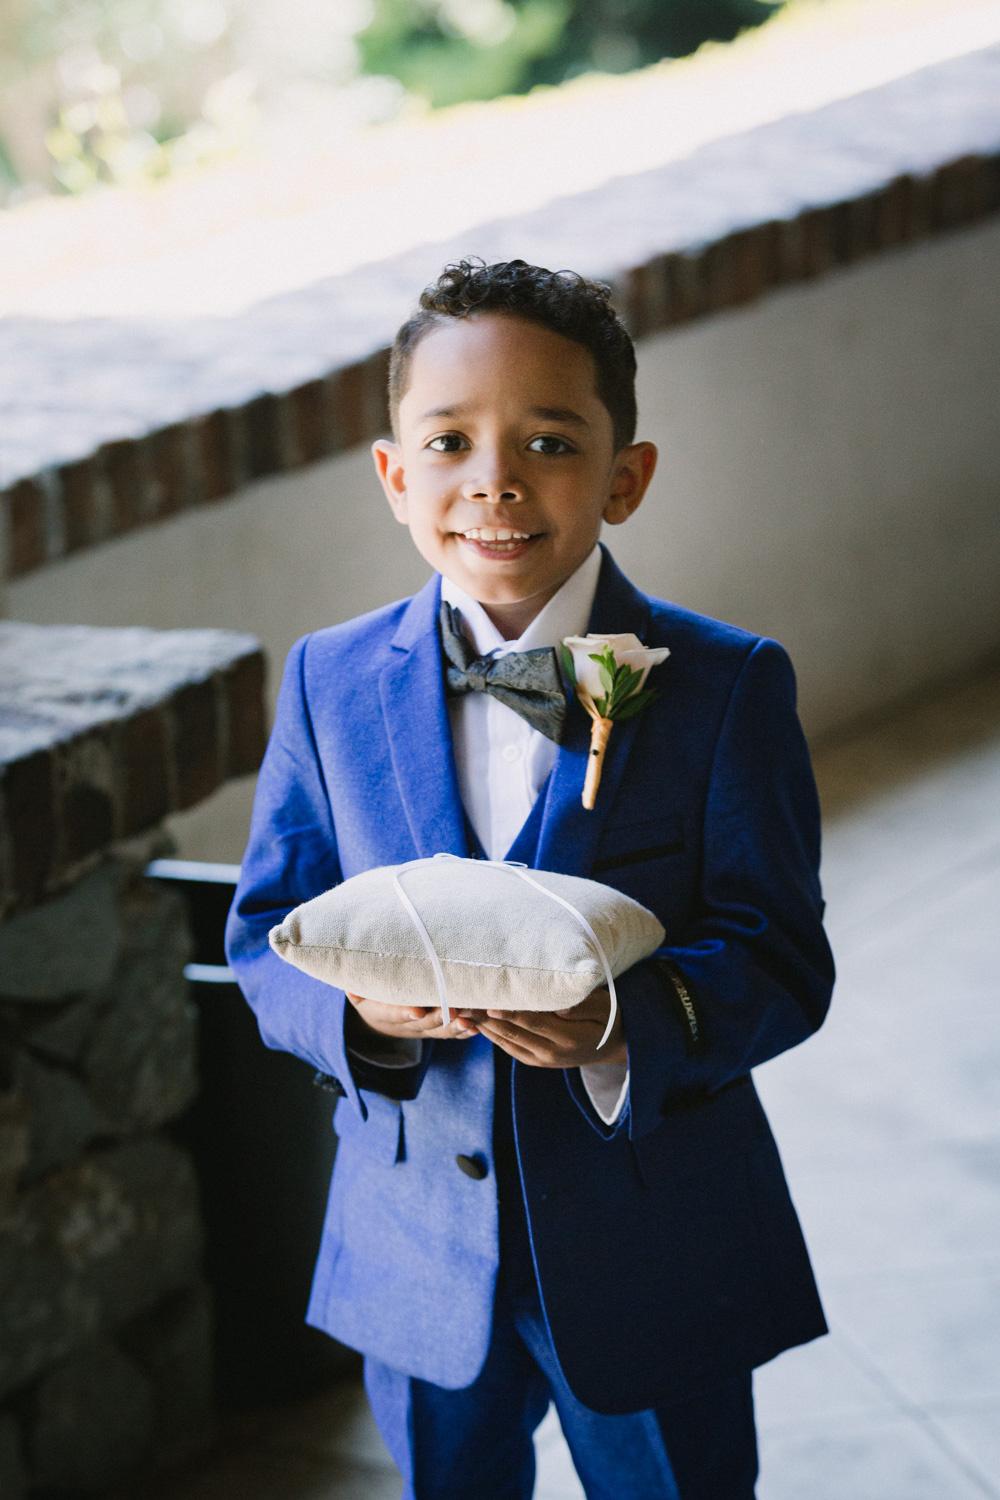 Wedding Ring Bearers: How to Choose One ...